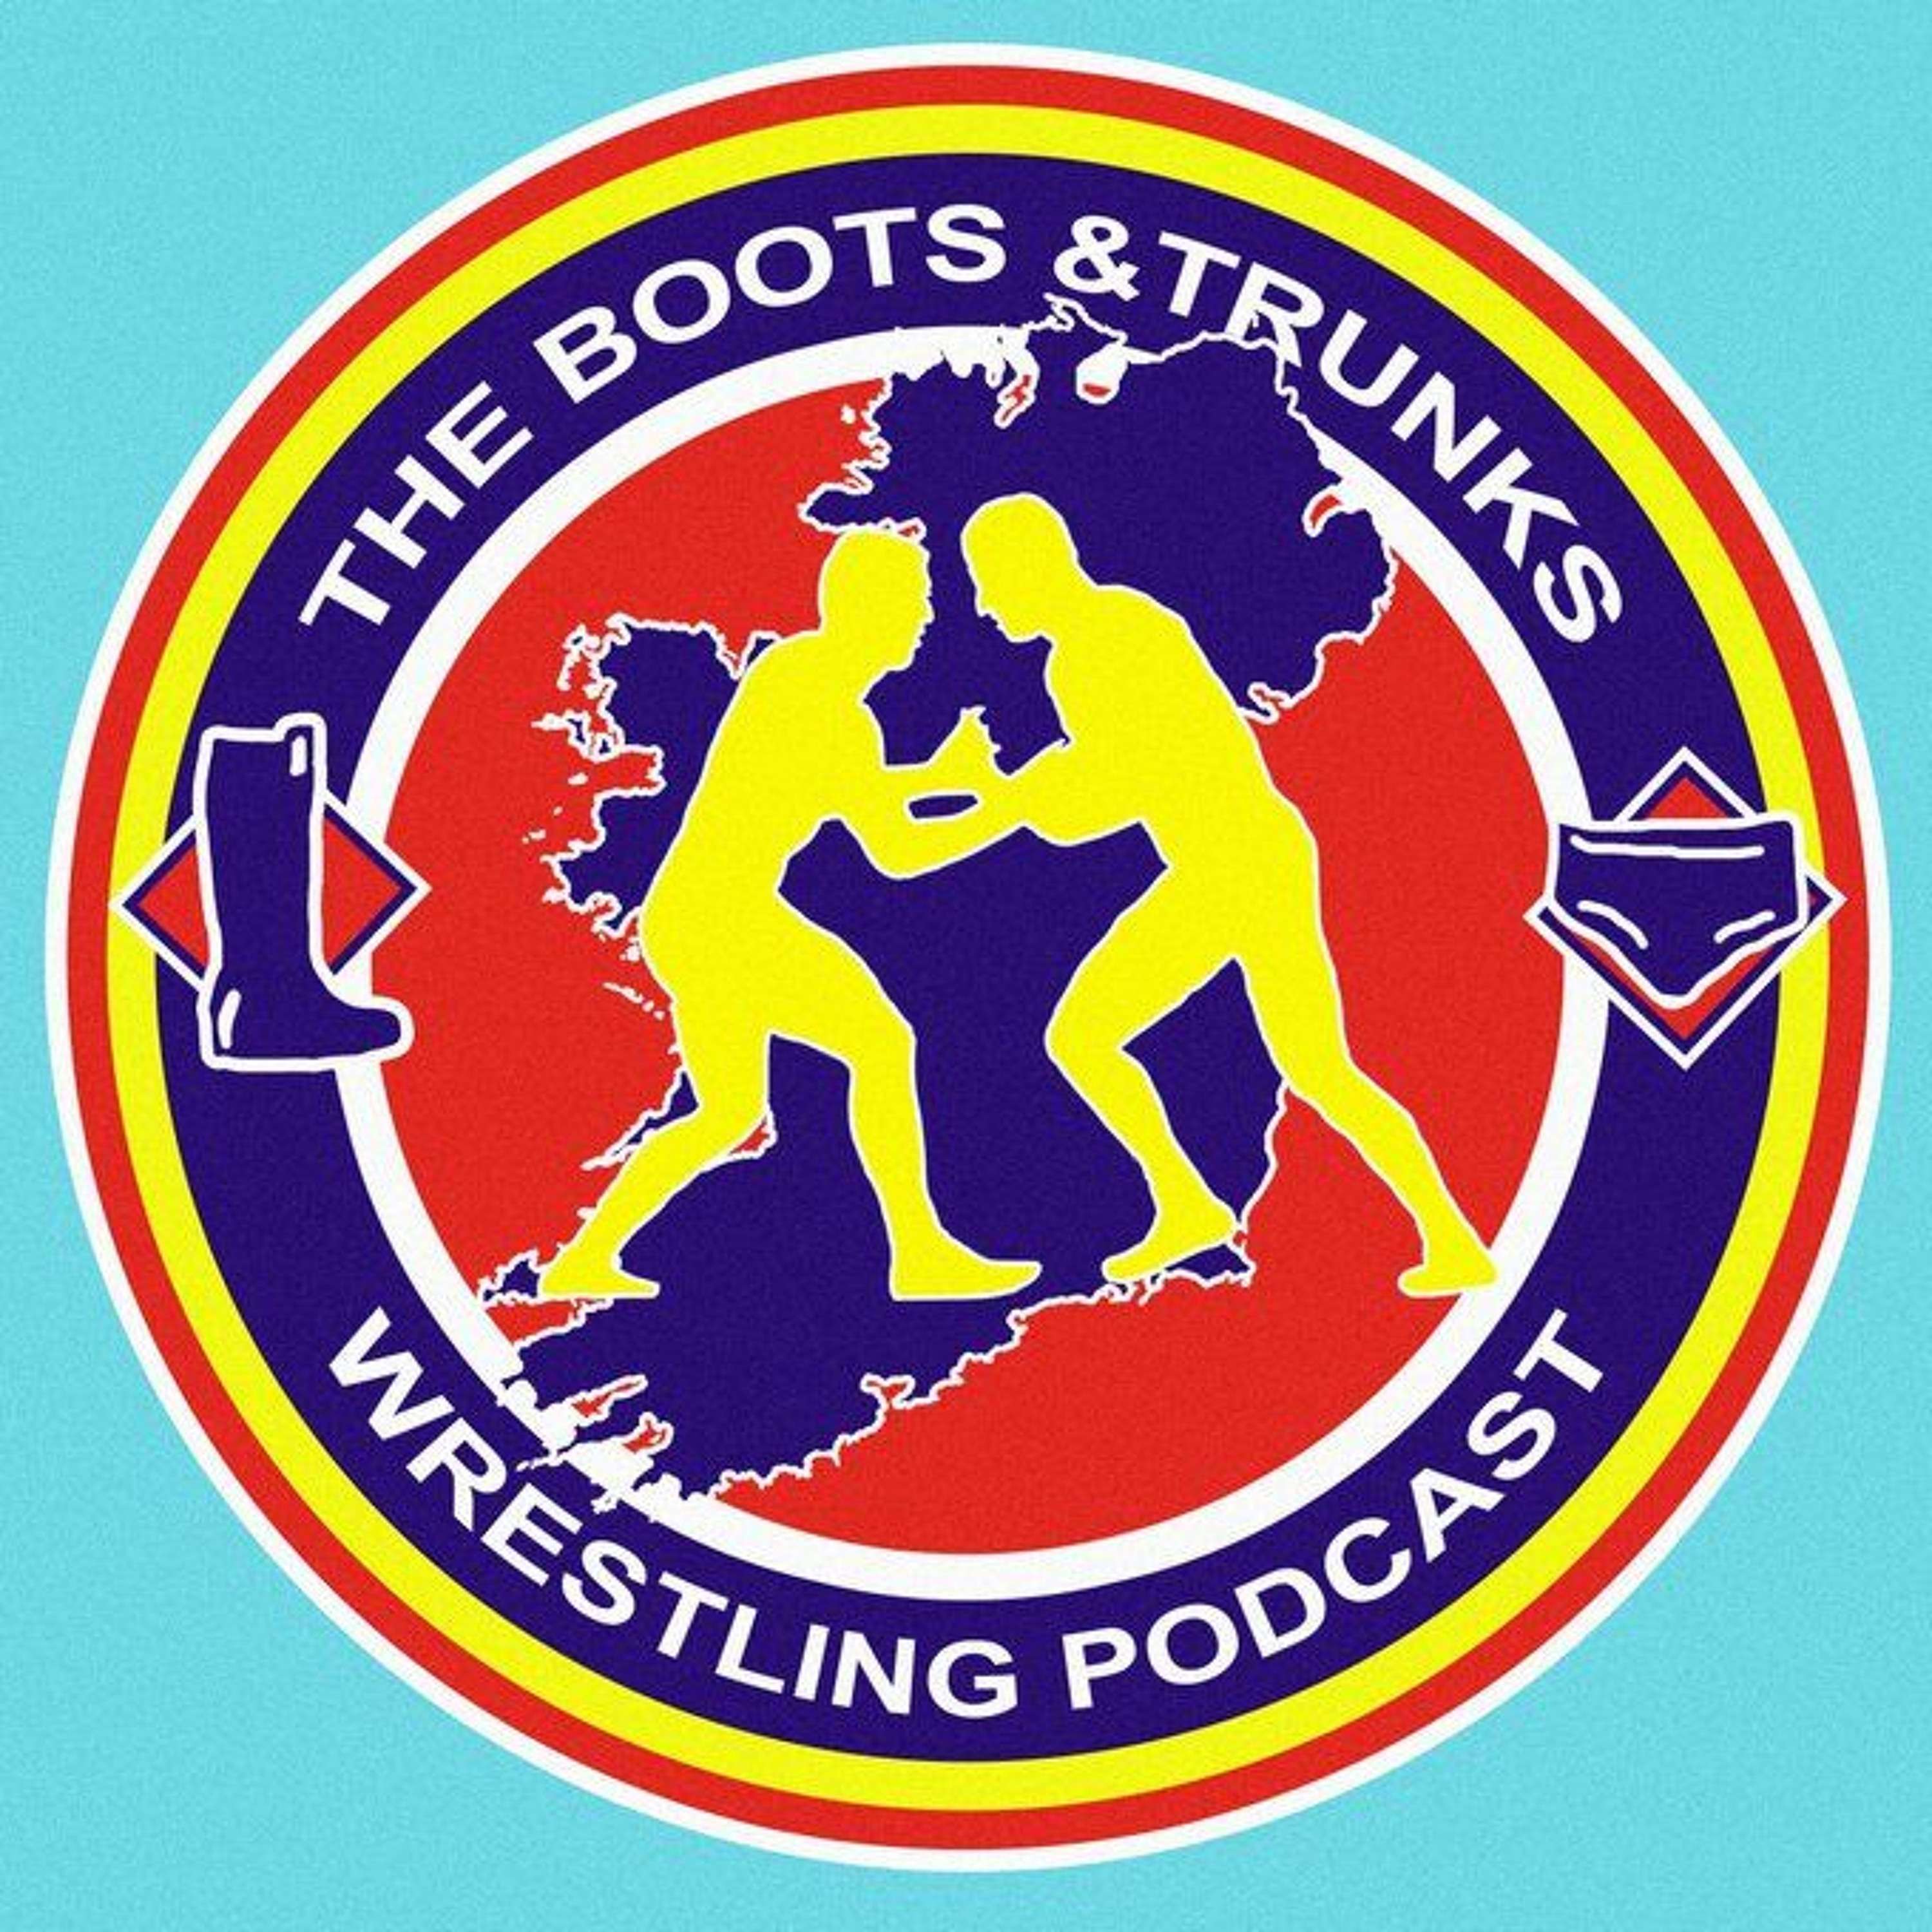 Boots and Trunks Podcast: Episode 4 - The Humble Headlock (Part 1)